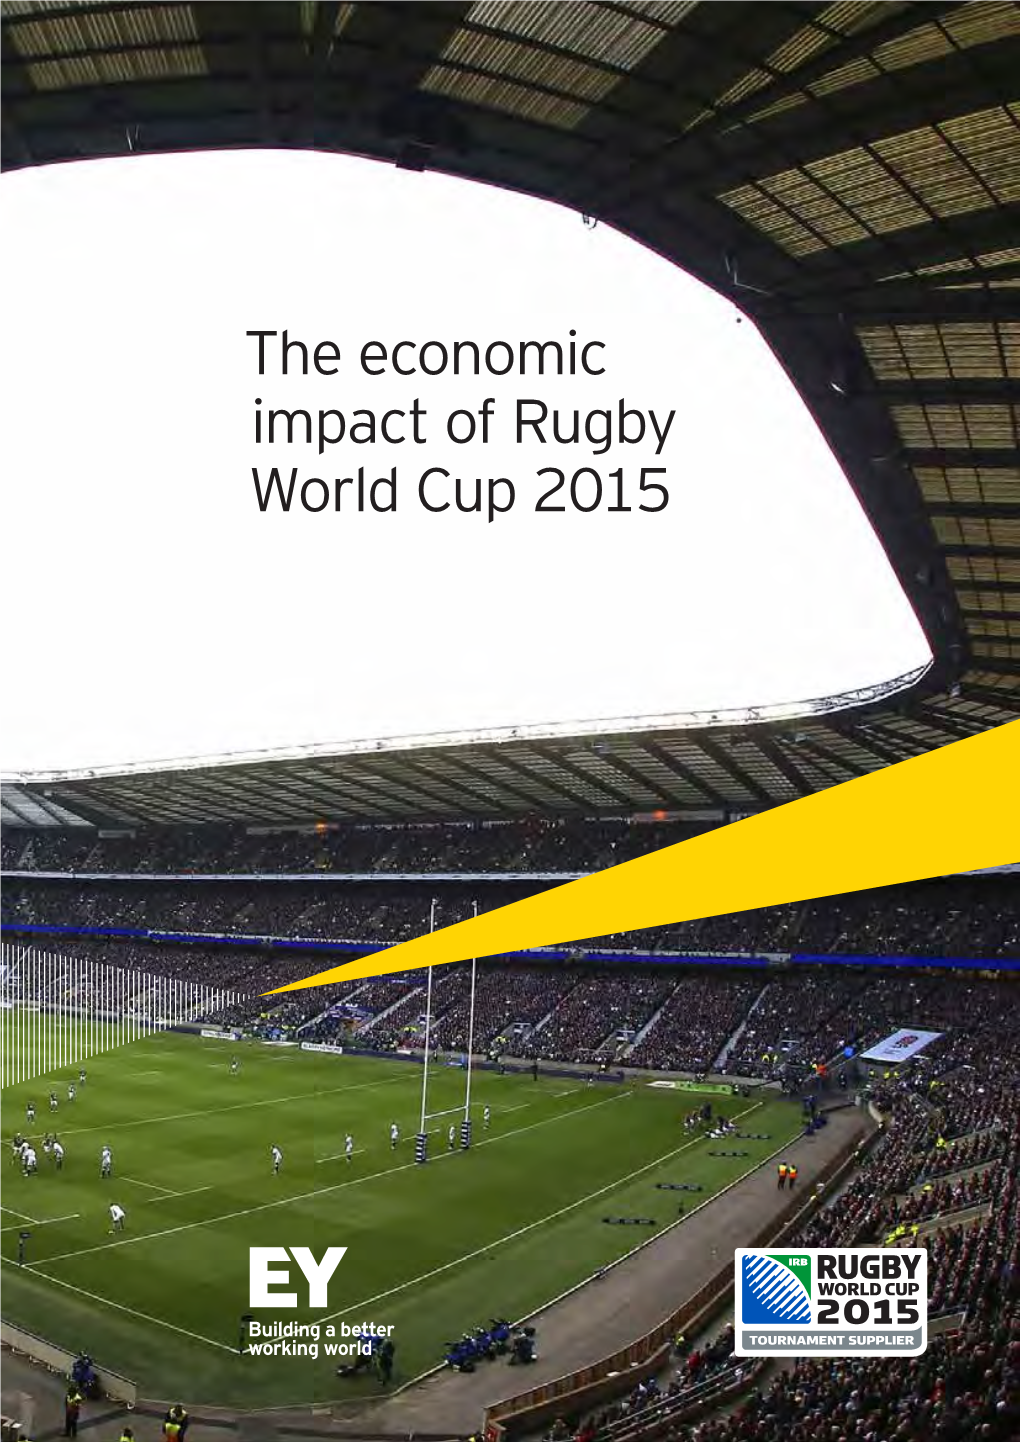 The Economic Impact of Rugby World Cup 2015 Executive Summary